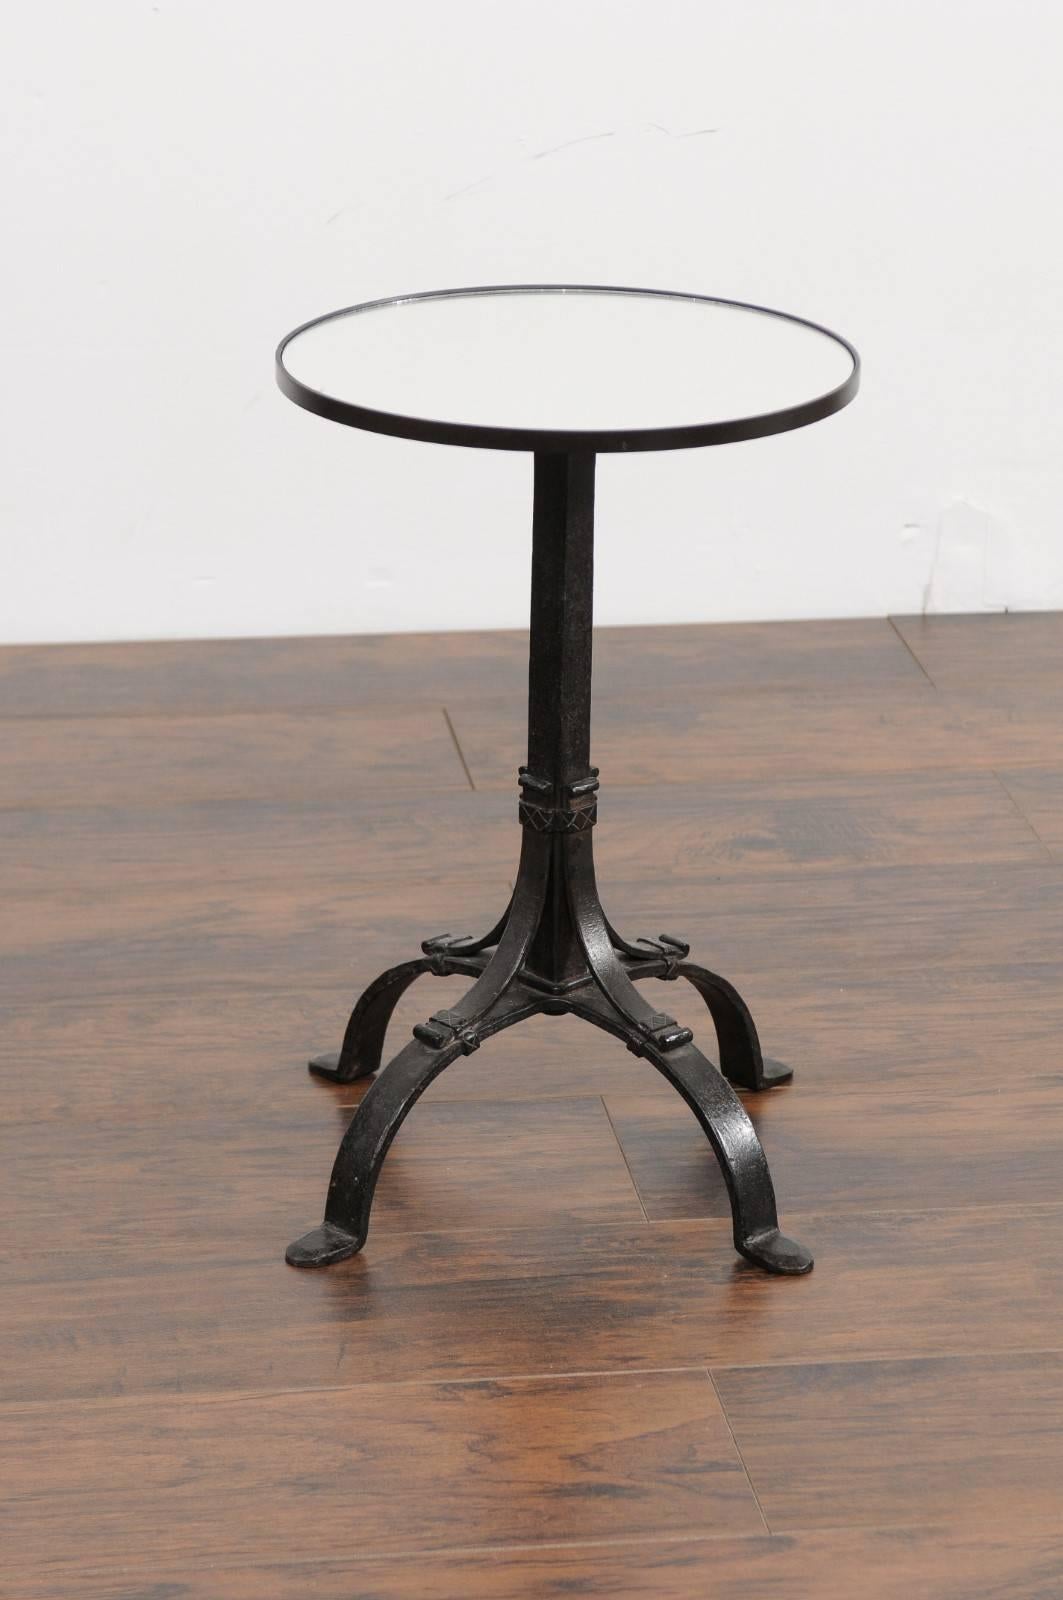 20th Century 1920s French Iron Base Drink Table with New Mirrored Top and Arched Feet